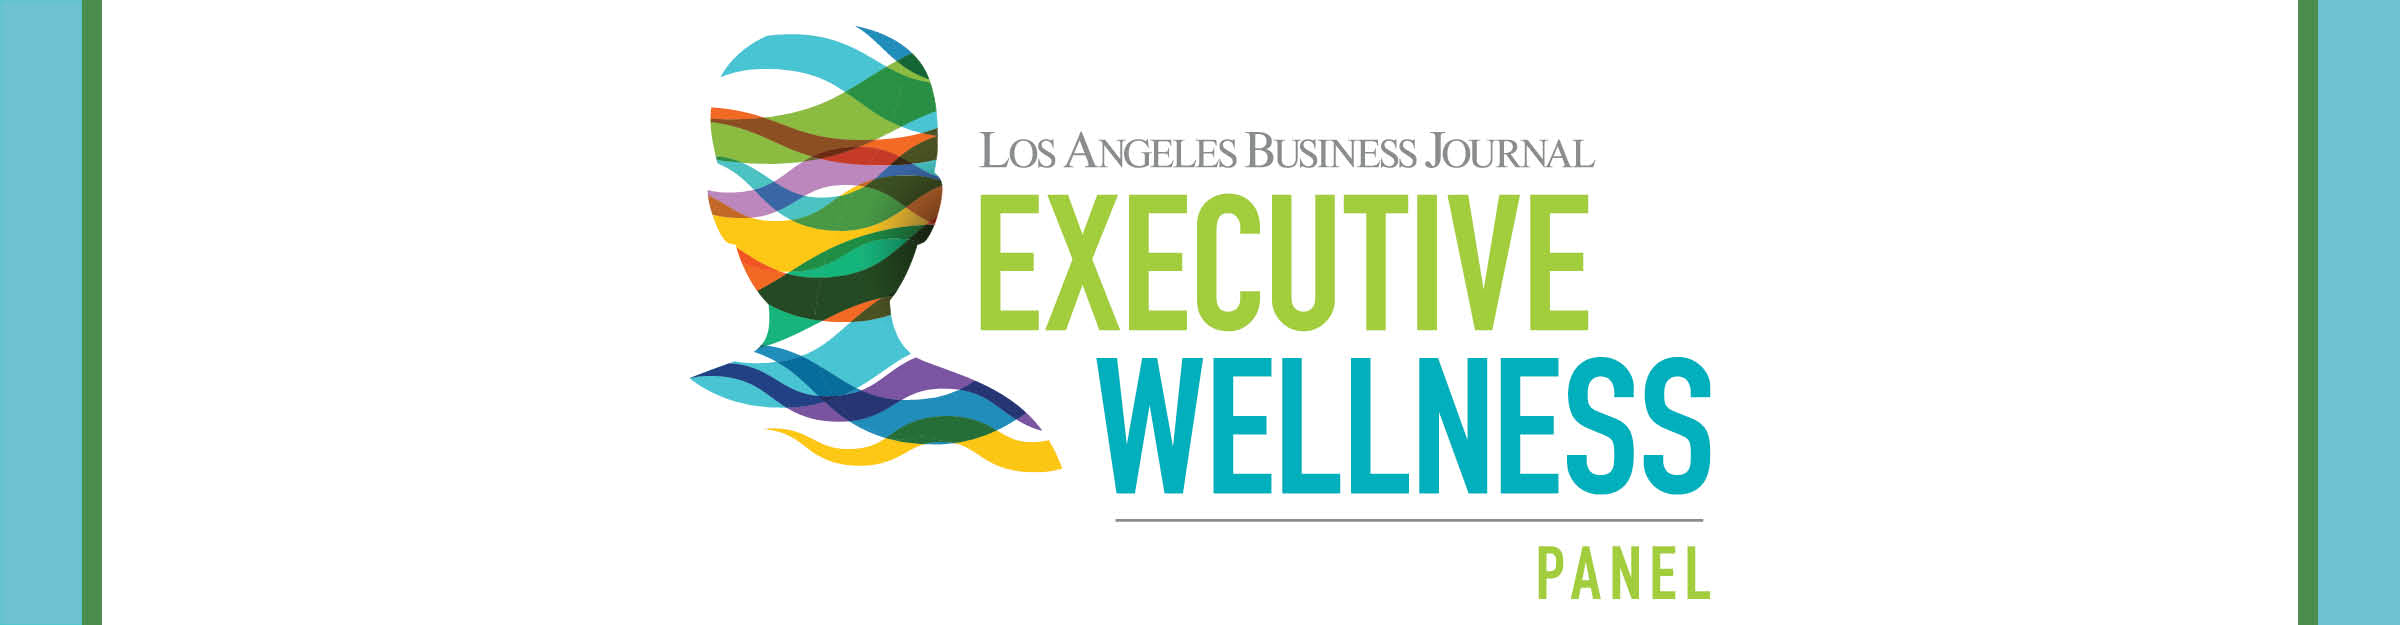 Los Angeles Business Journal Executive Wellness Event Banner